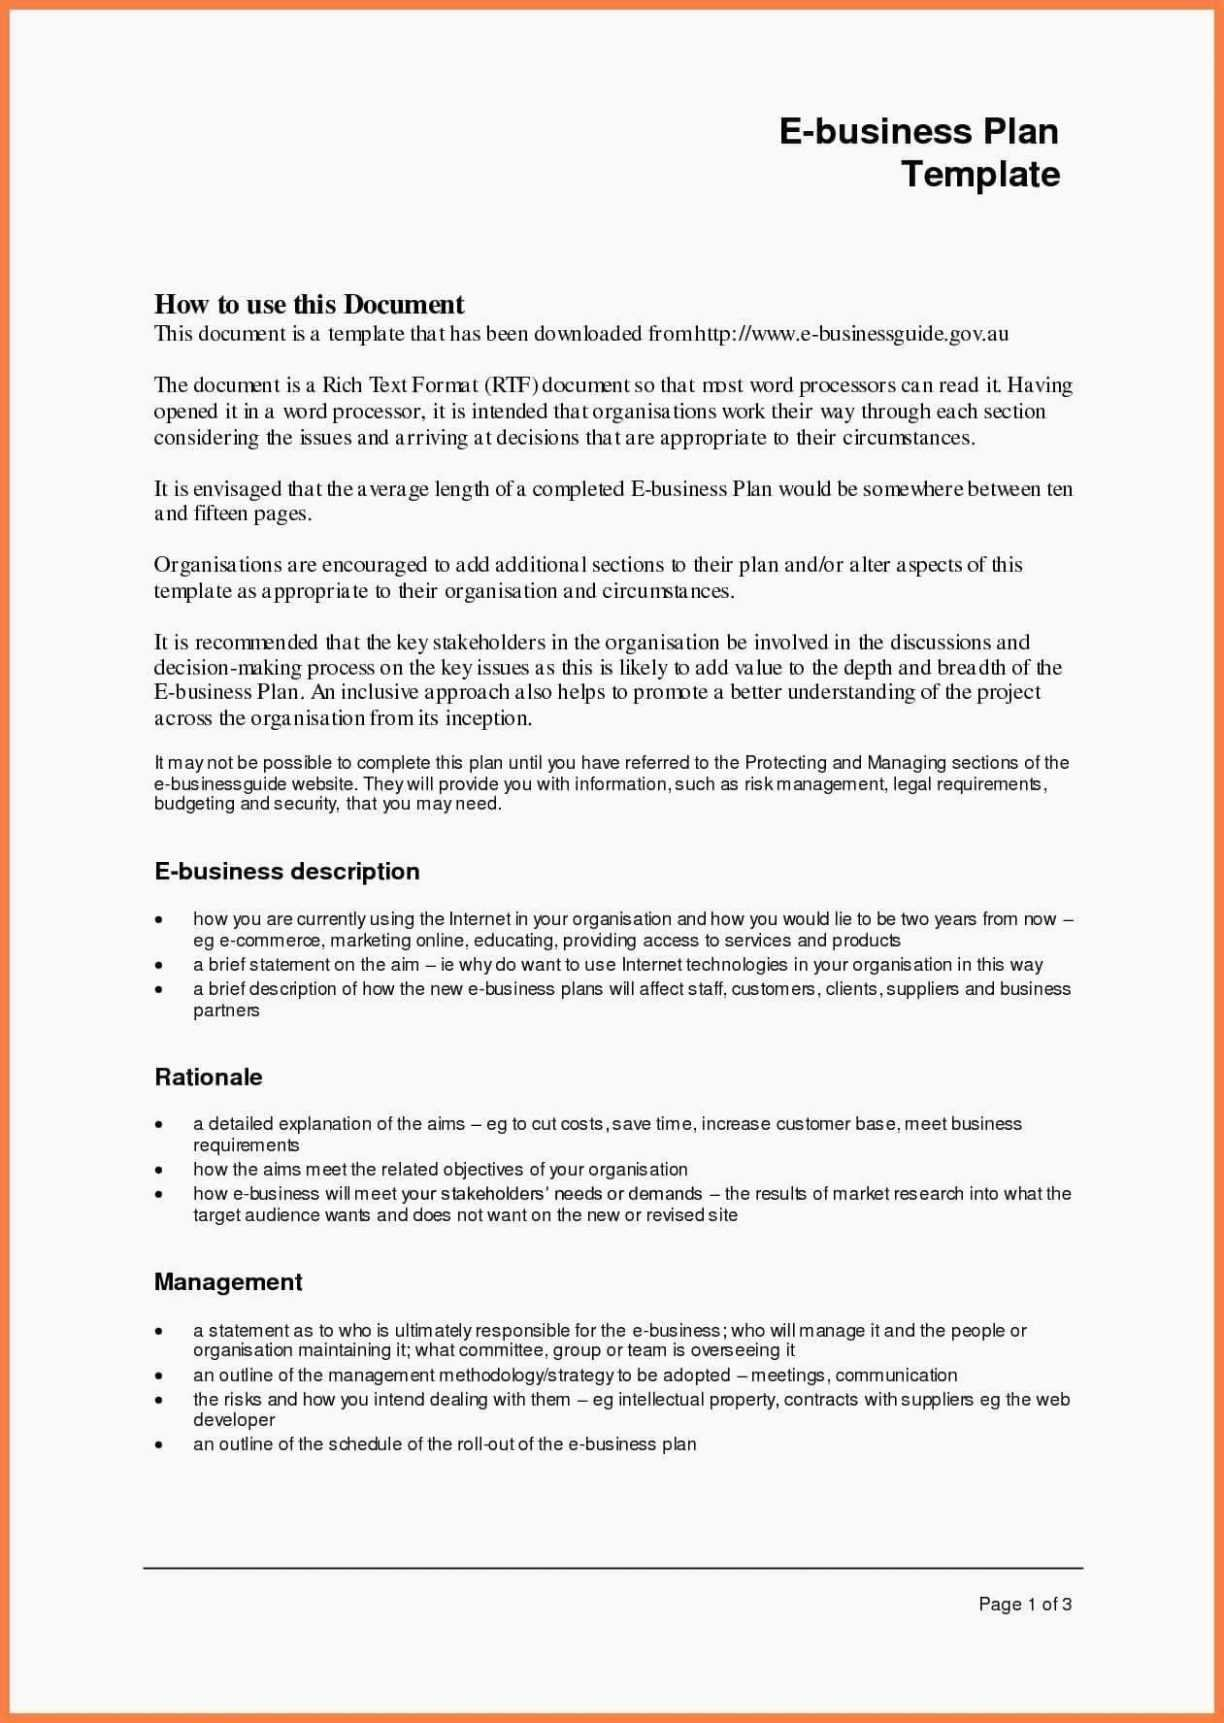 Business Plan Template Nancial Advisor New Marketing Report With Merrill Lynch Business Plan Template